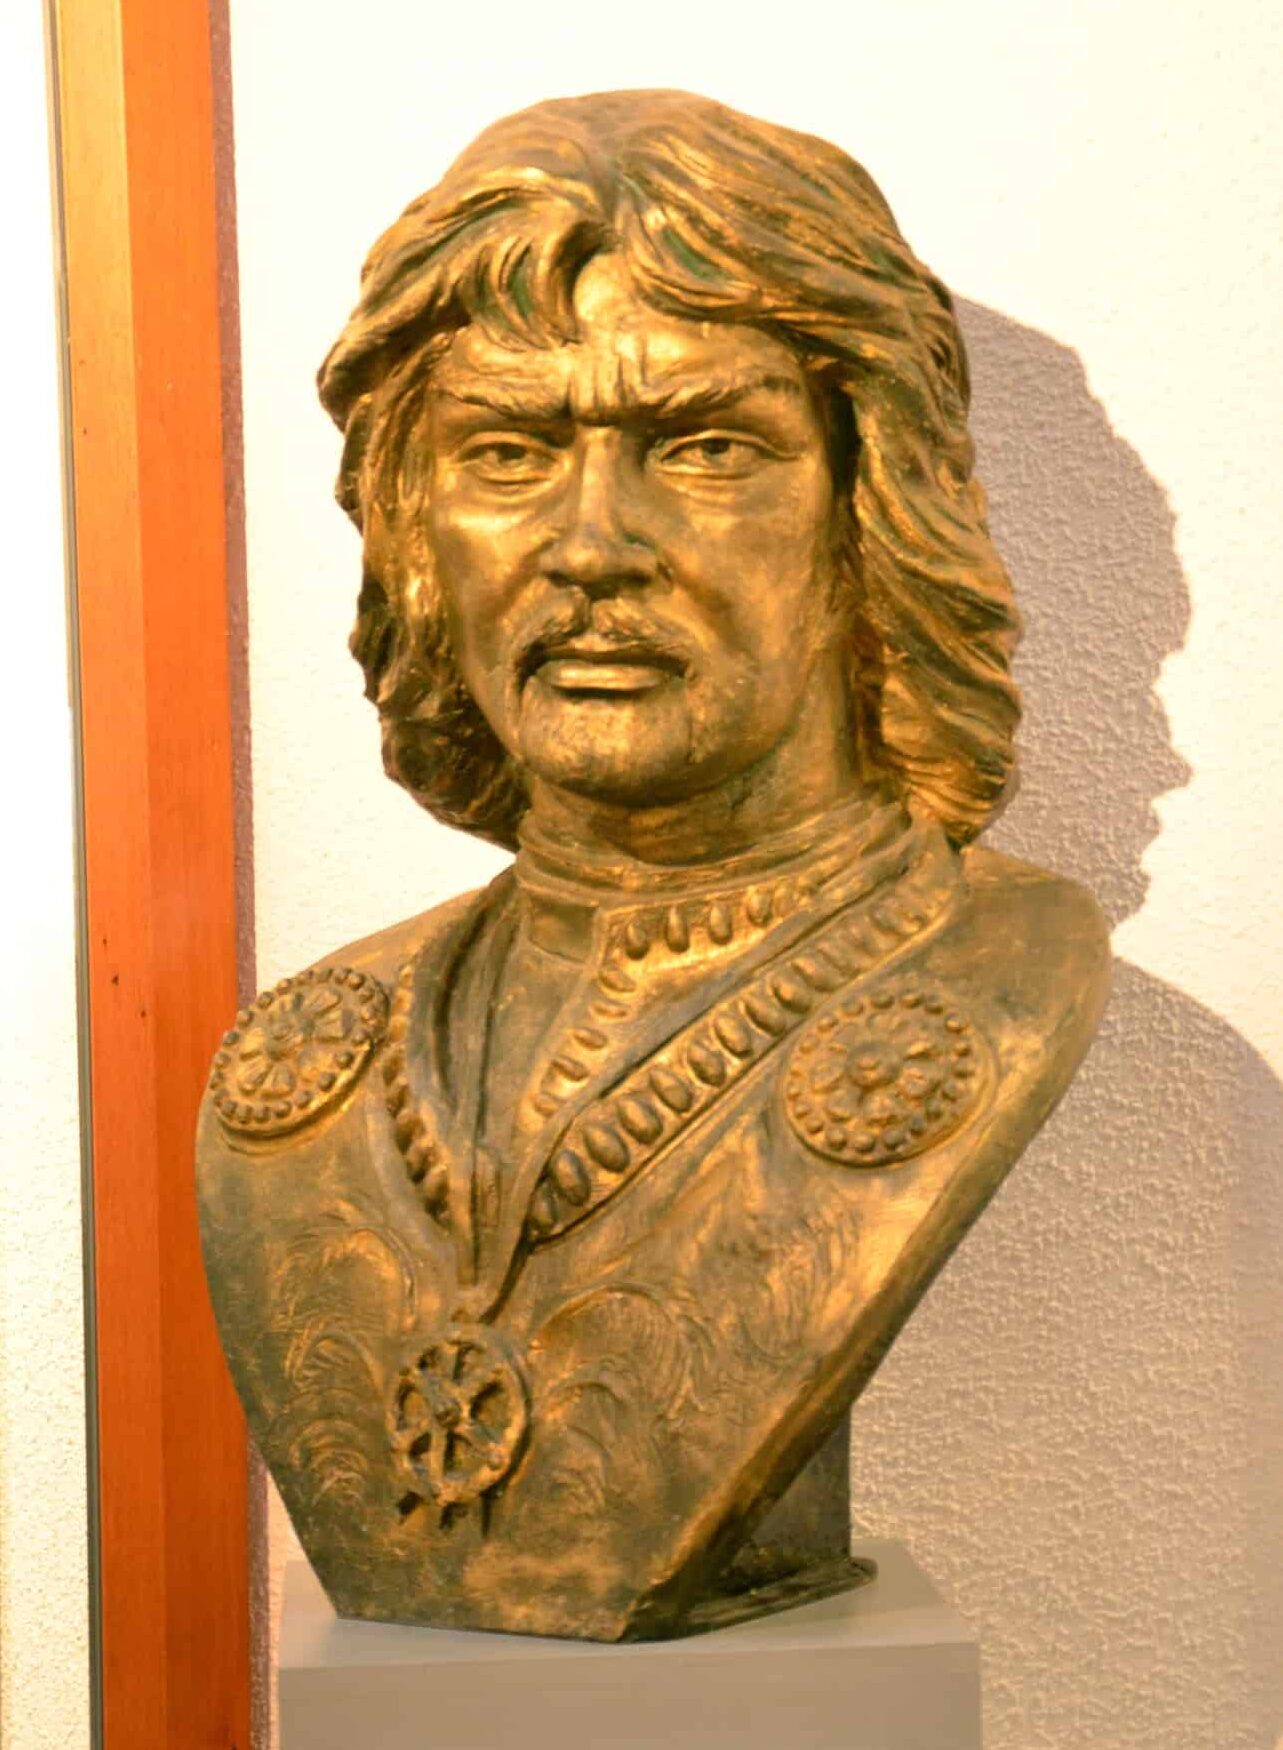 Bust of Attila the Hun at the Harbiye Military Museum in Istanbul, Turkey